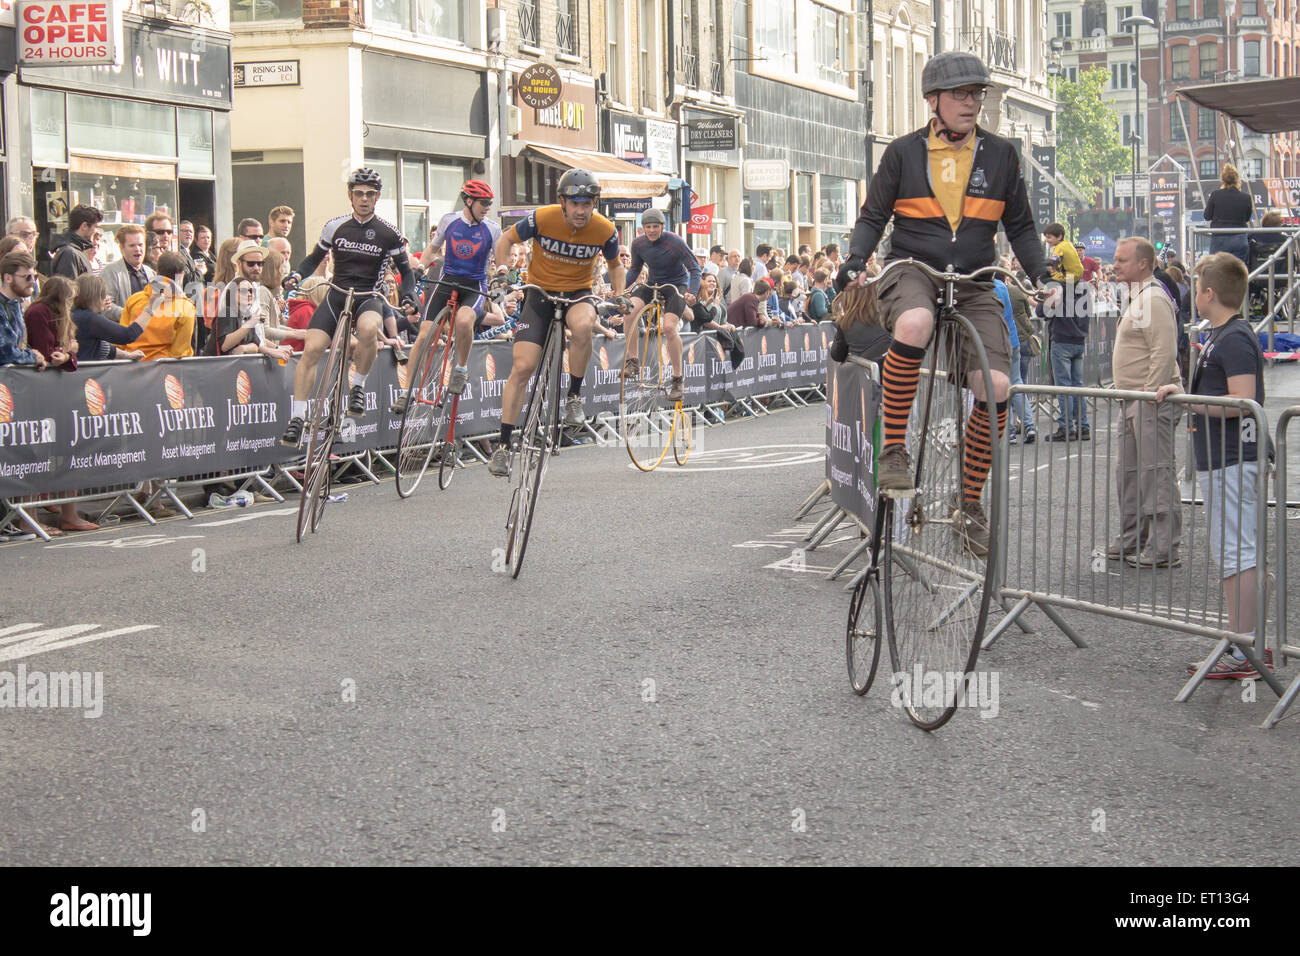 LONDON, UNITED KINGDOM, 6TH JUNE 2015 - Cyclists compete at the London Nocturne's Penny Farthing Race in Smithfield. Stock Photo